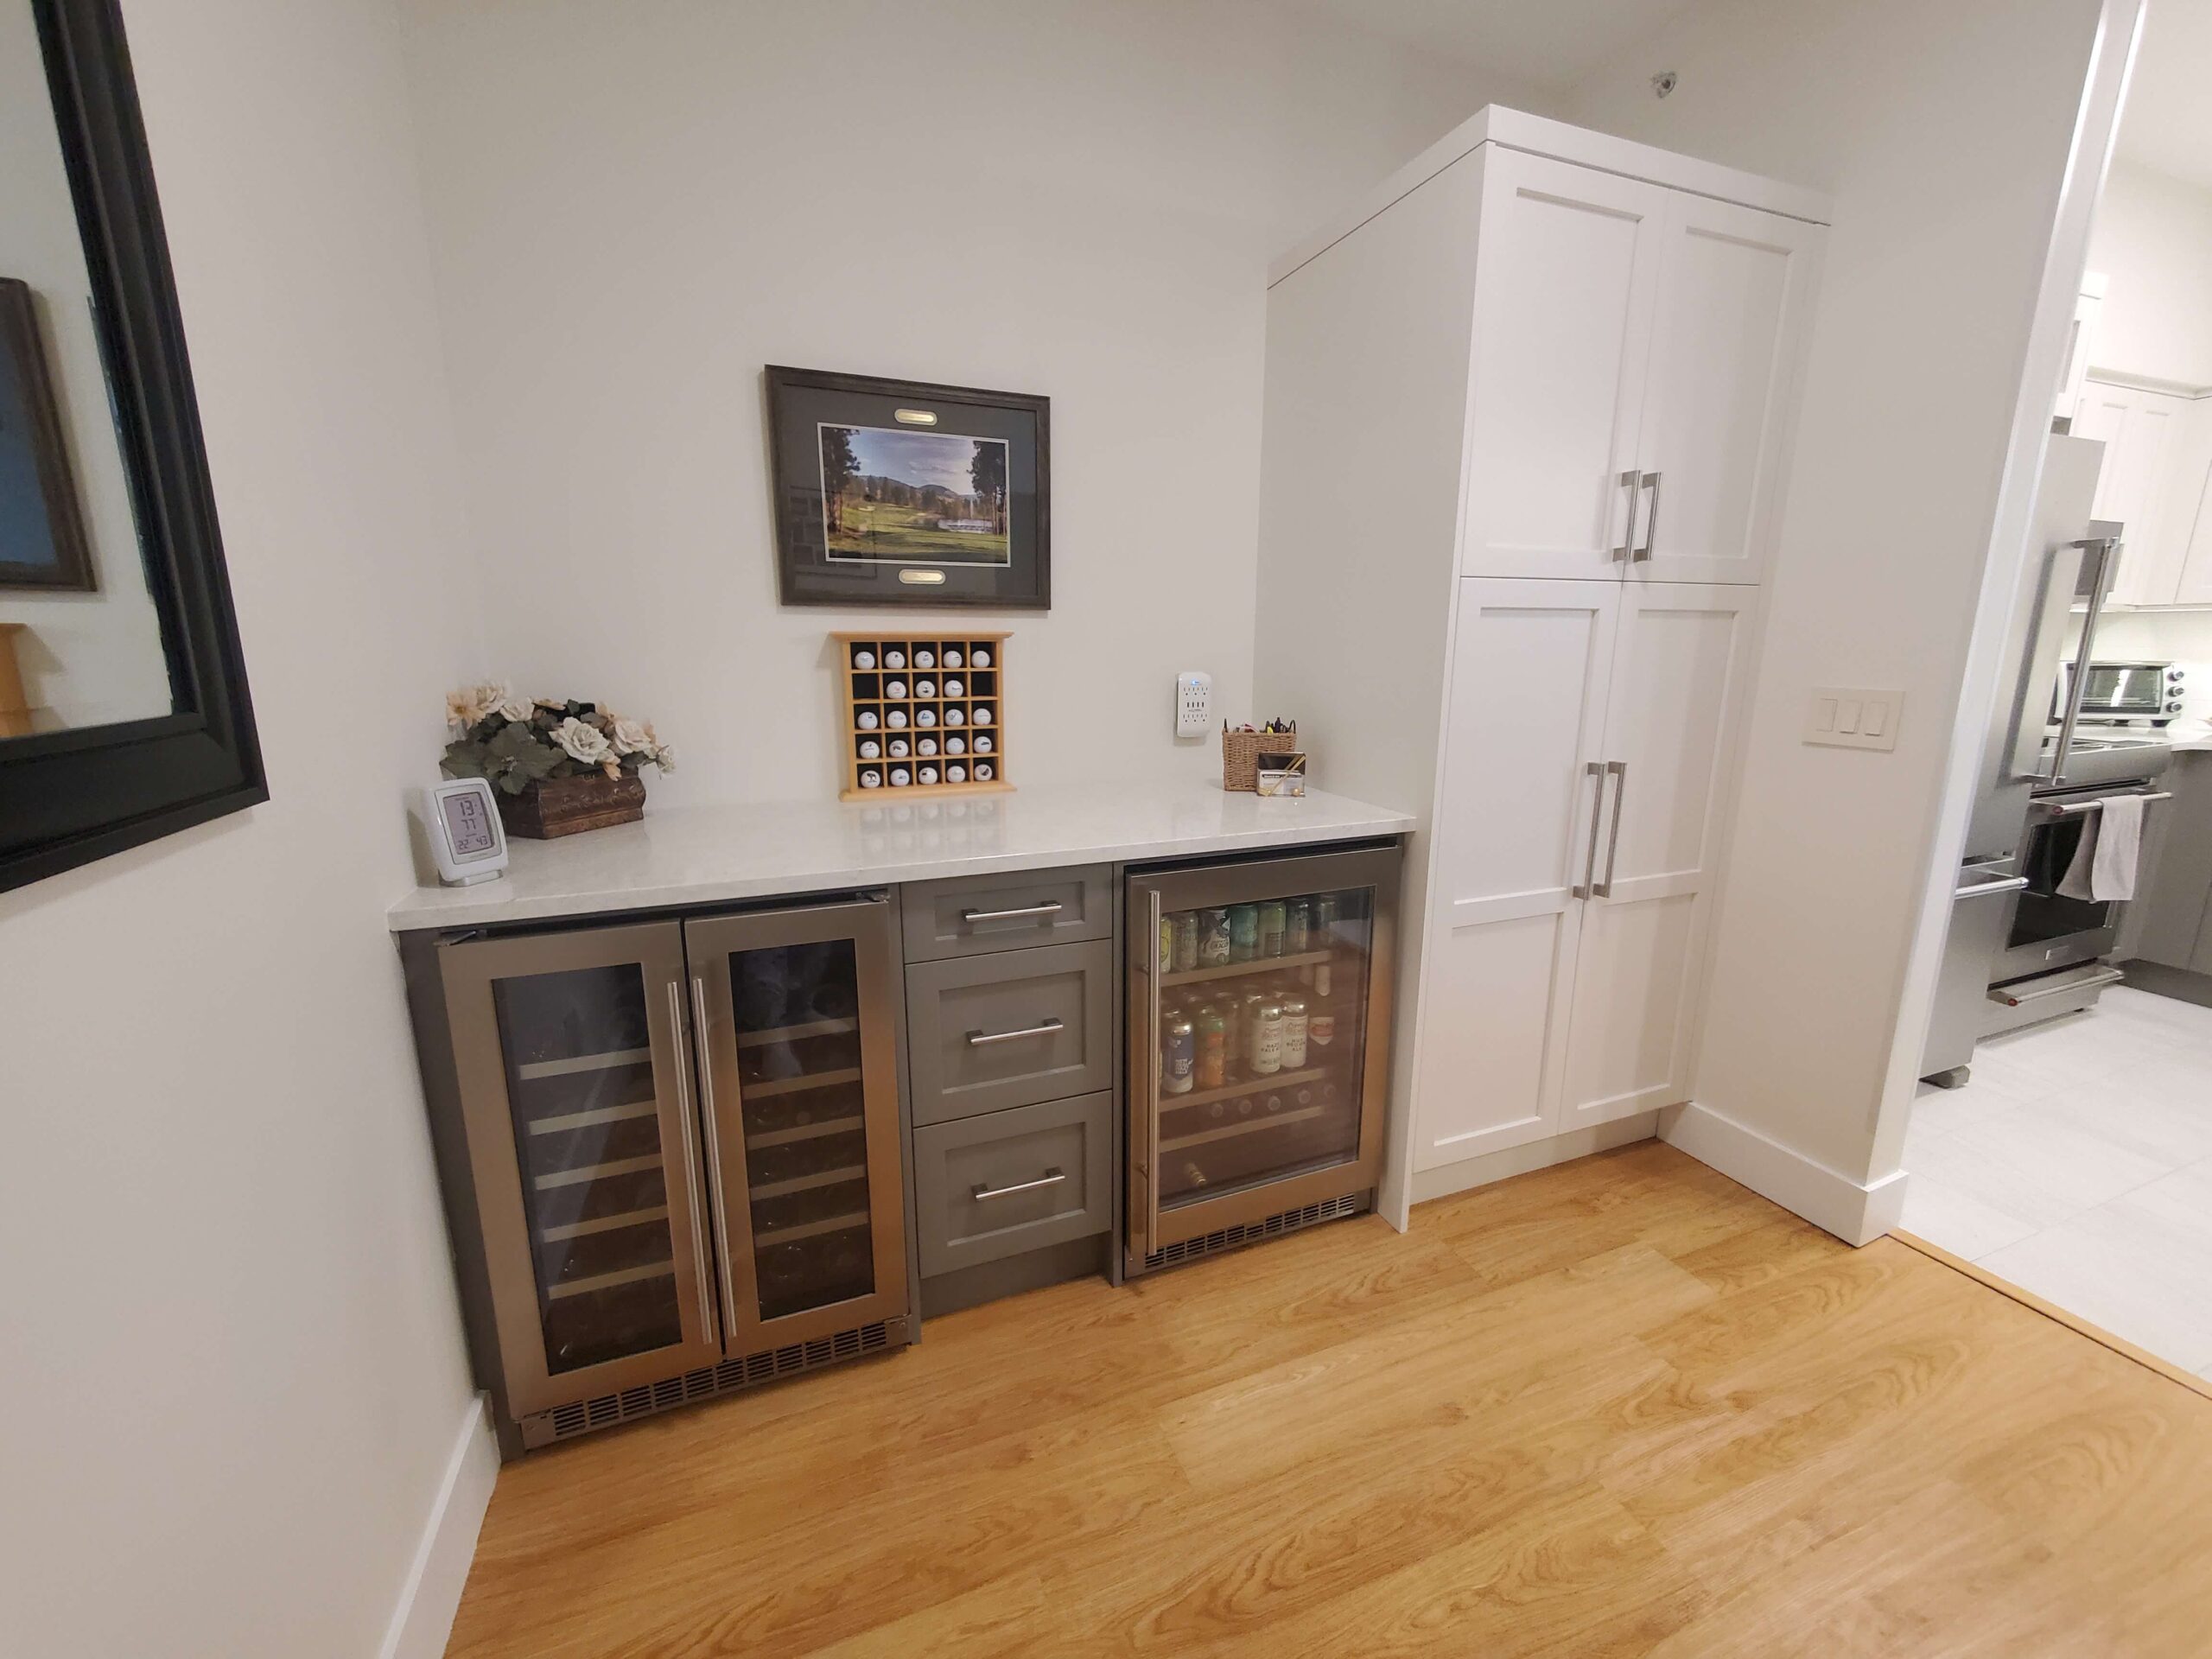 pantry renovation including storage and updated wine fridge